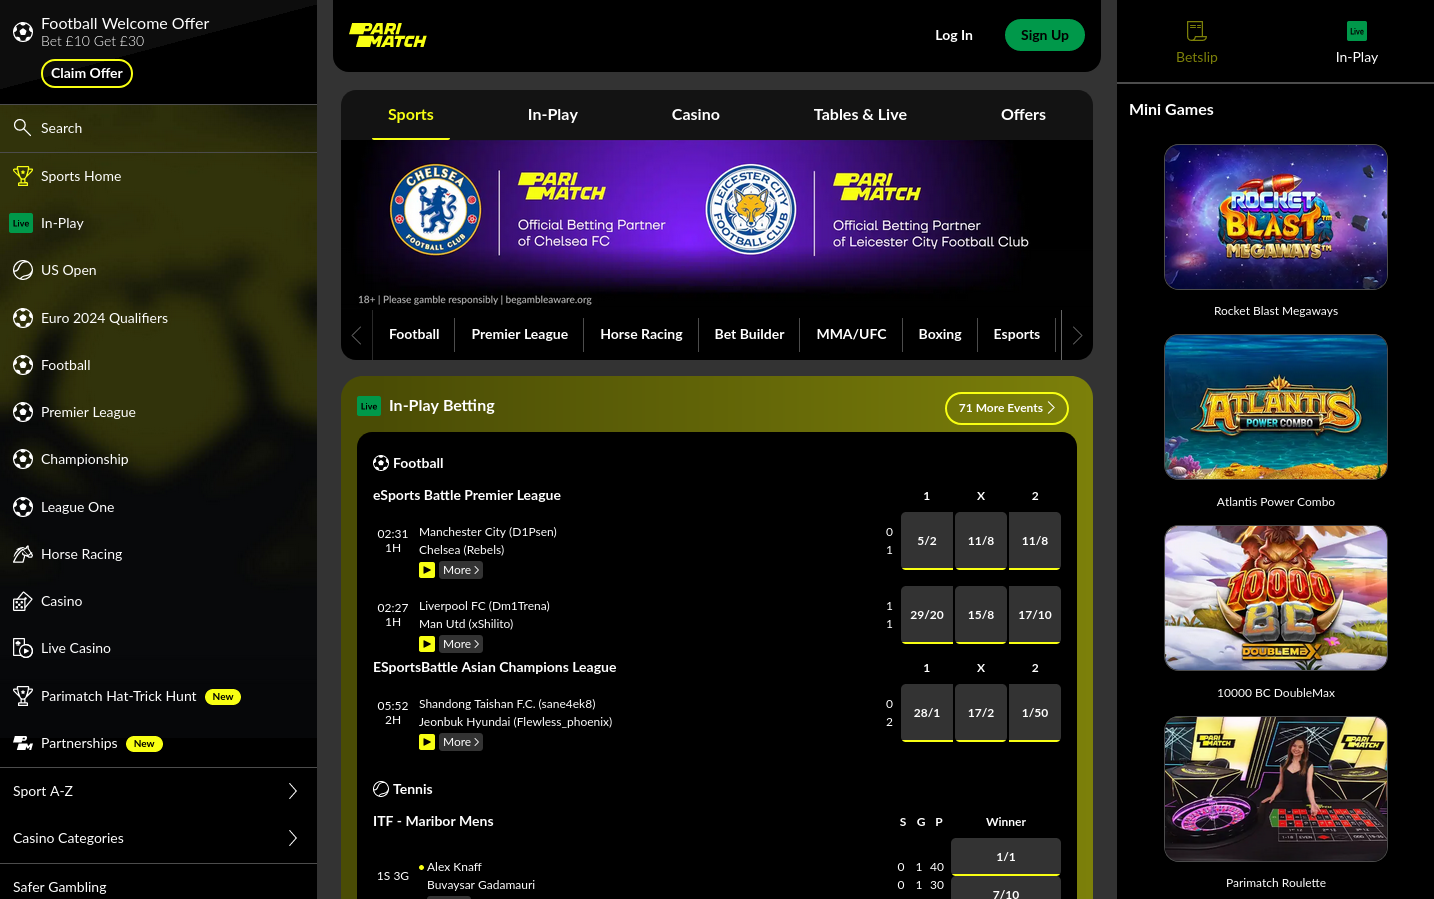 Parimatch's website which states they are an "Official Betting Partner" of LCFC